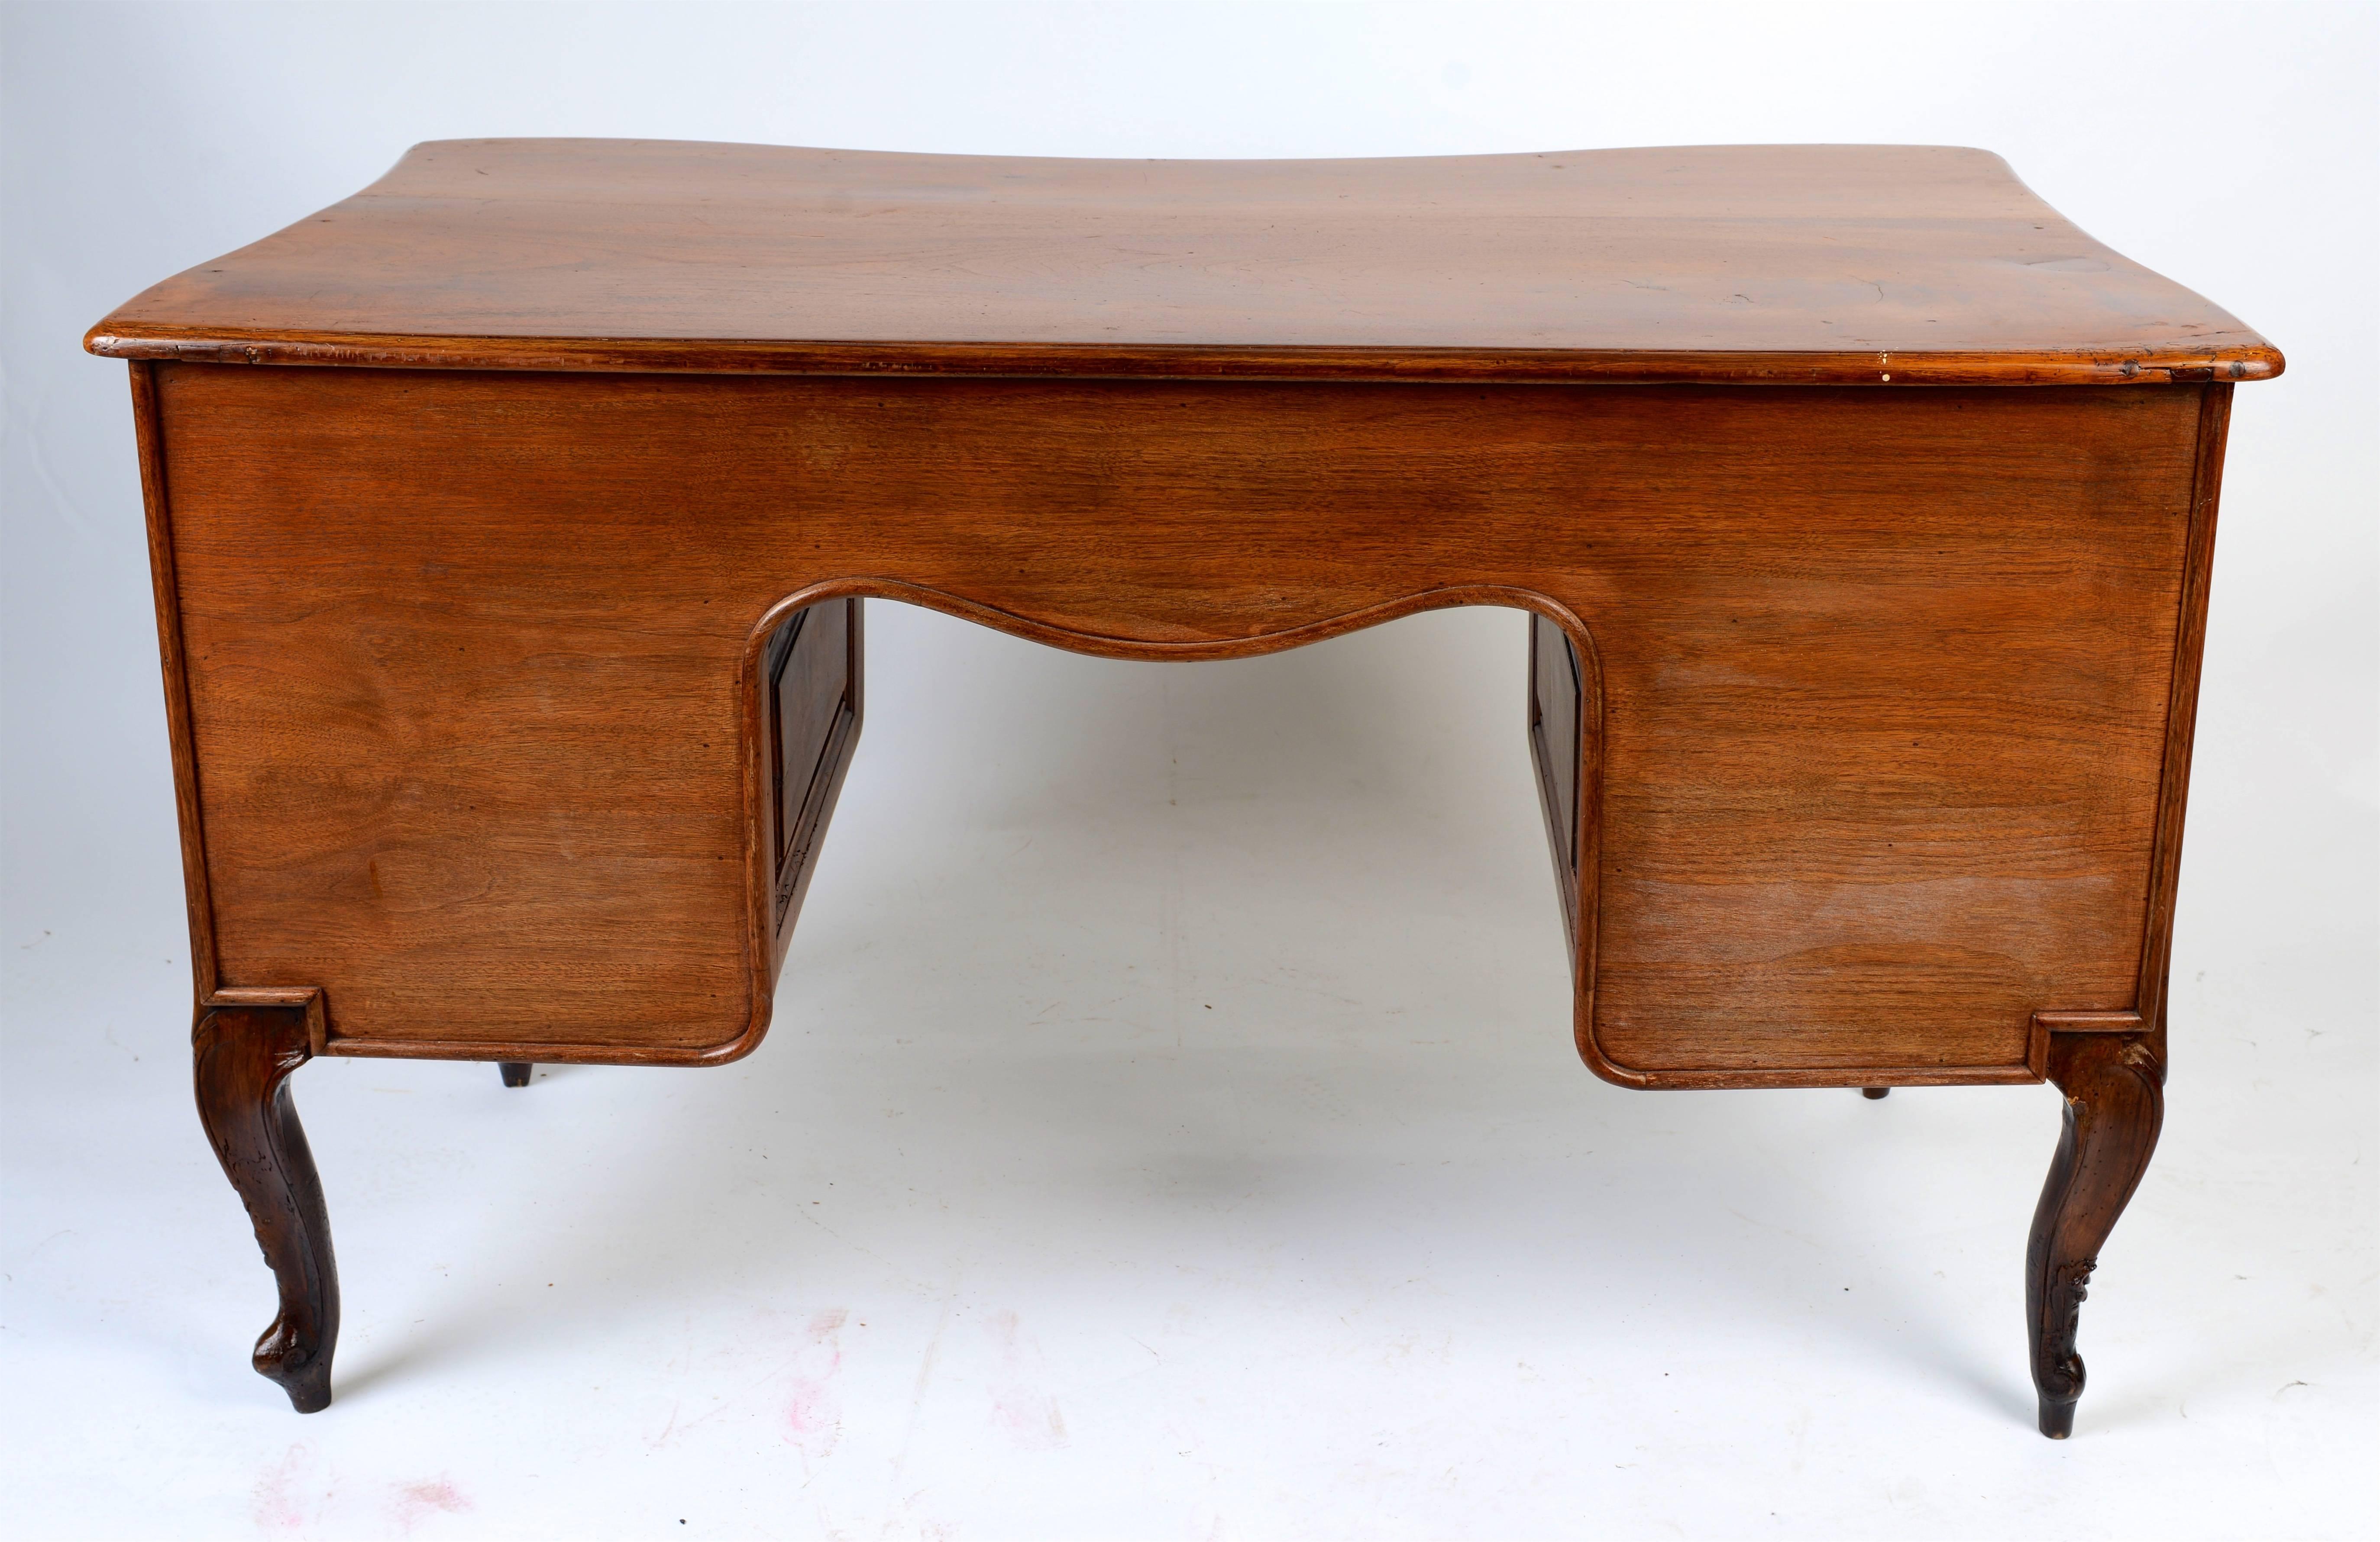 This graceful French desk has a shaped single plank walnut top and a softly curved front with seven curved, raised panel drawers. The knee hole apron is carved with a centre shell surrounded by scrolls that coordinate with the drawer mounts having